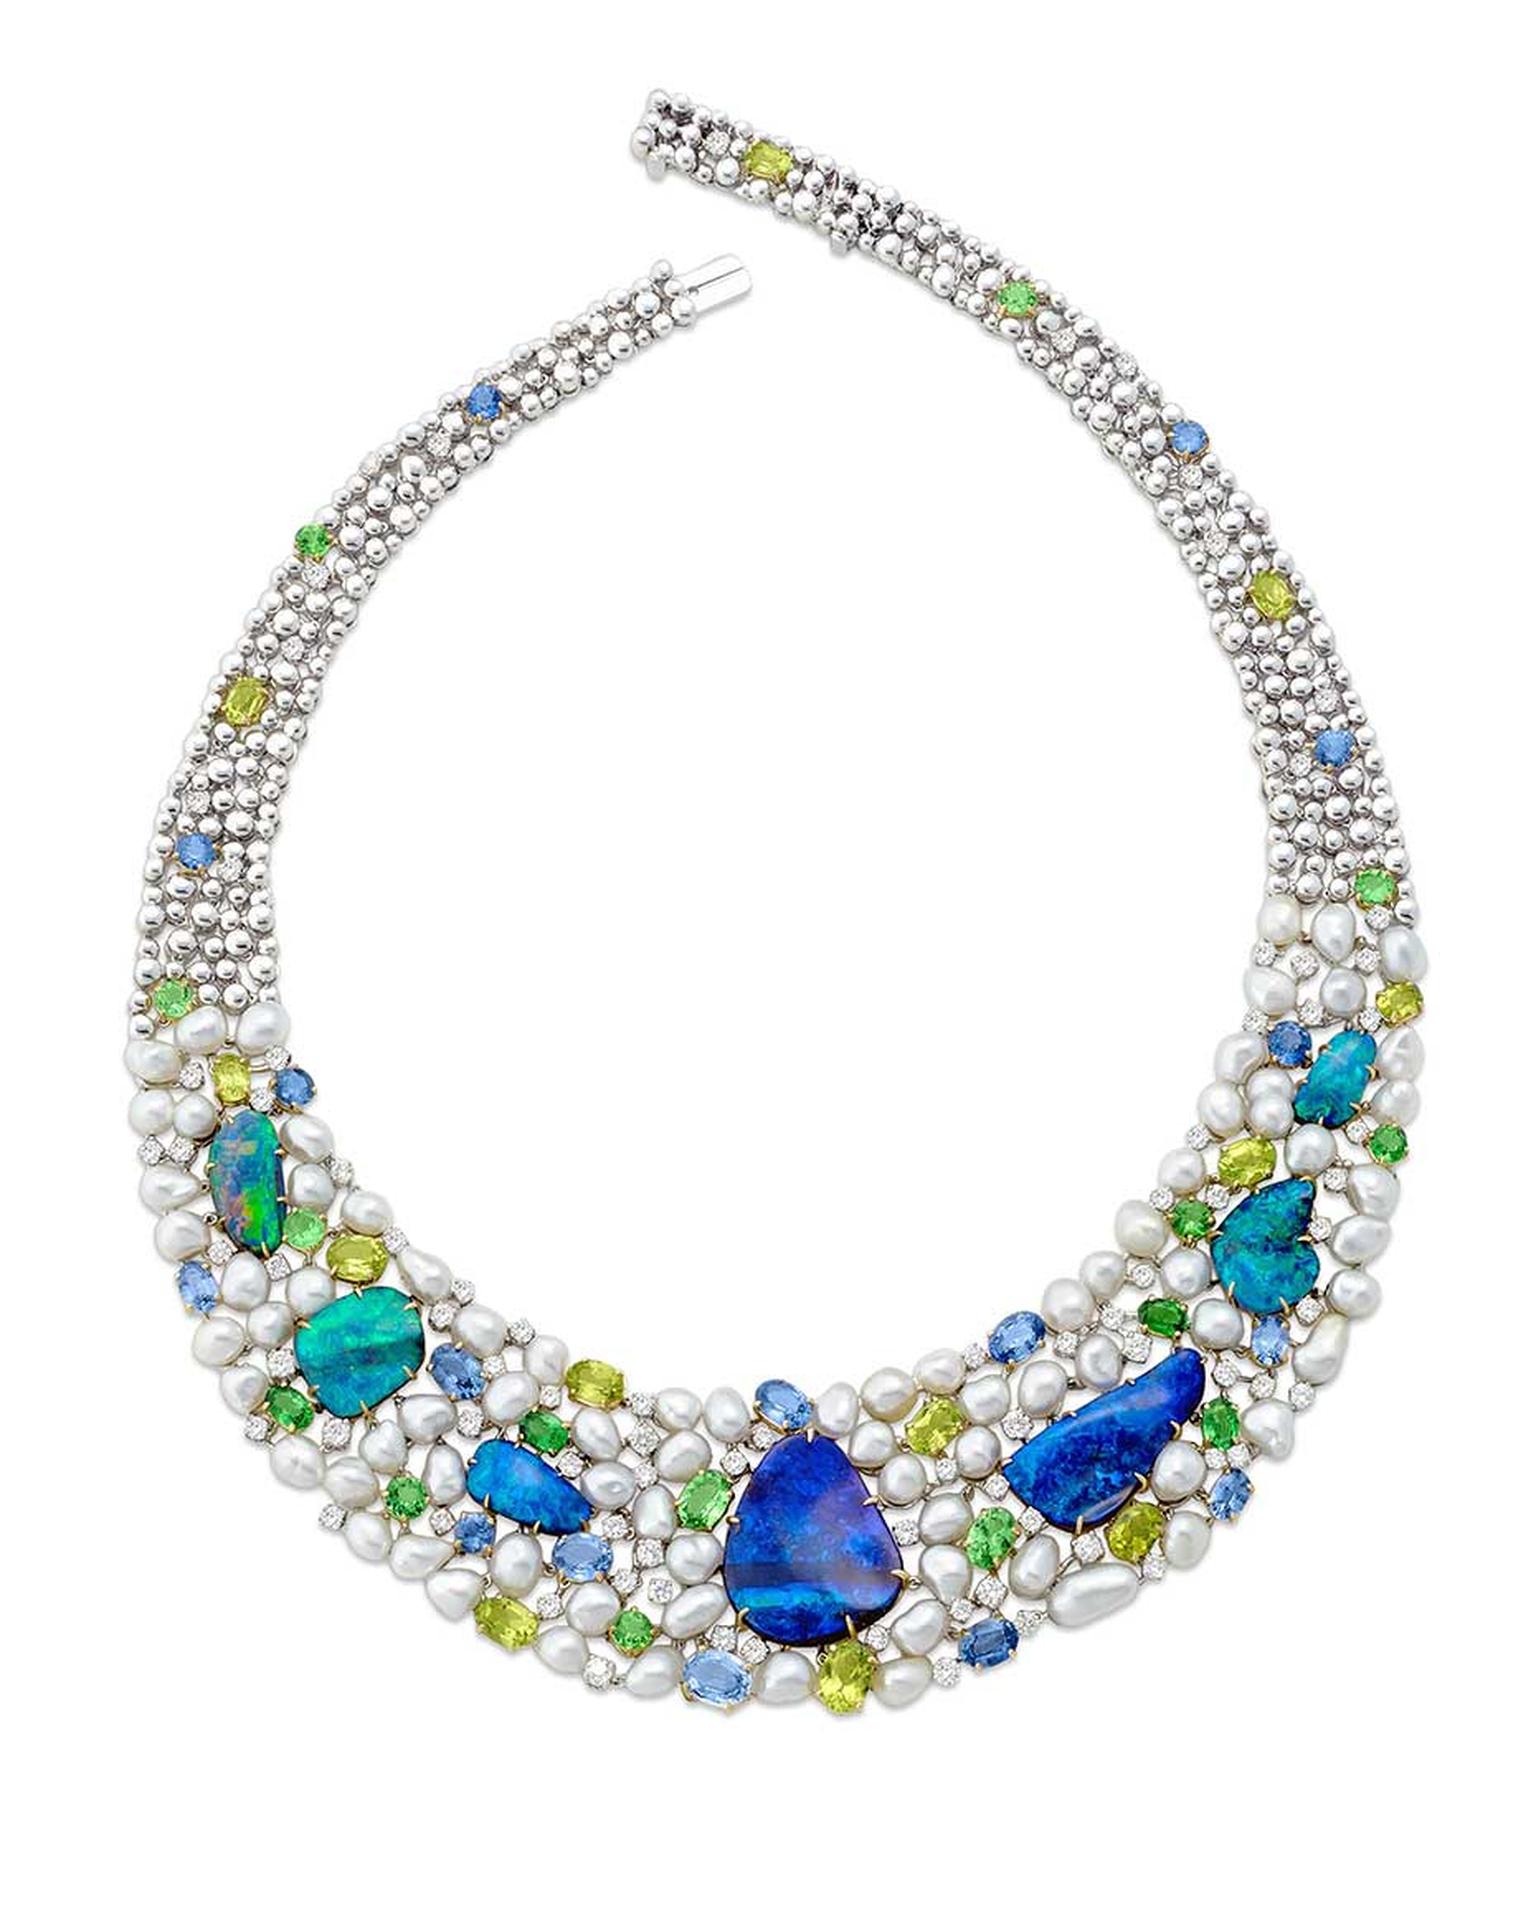 Margot McKinney Objects of Desire 130th anniversary collection necklace featuring black opals, Australian Keshi South Sea pearls, sapphires, aquamarines, peridot and a sprinkling of diamonds.